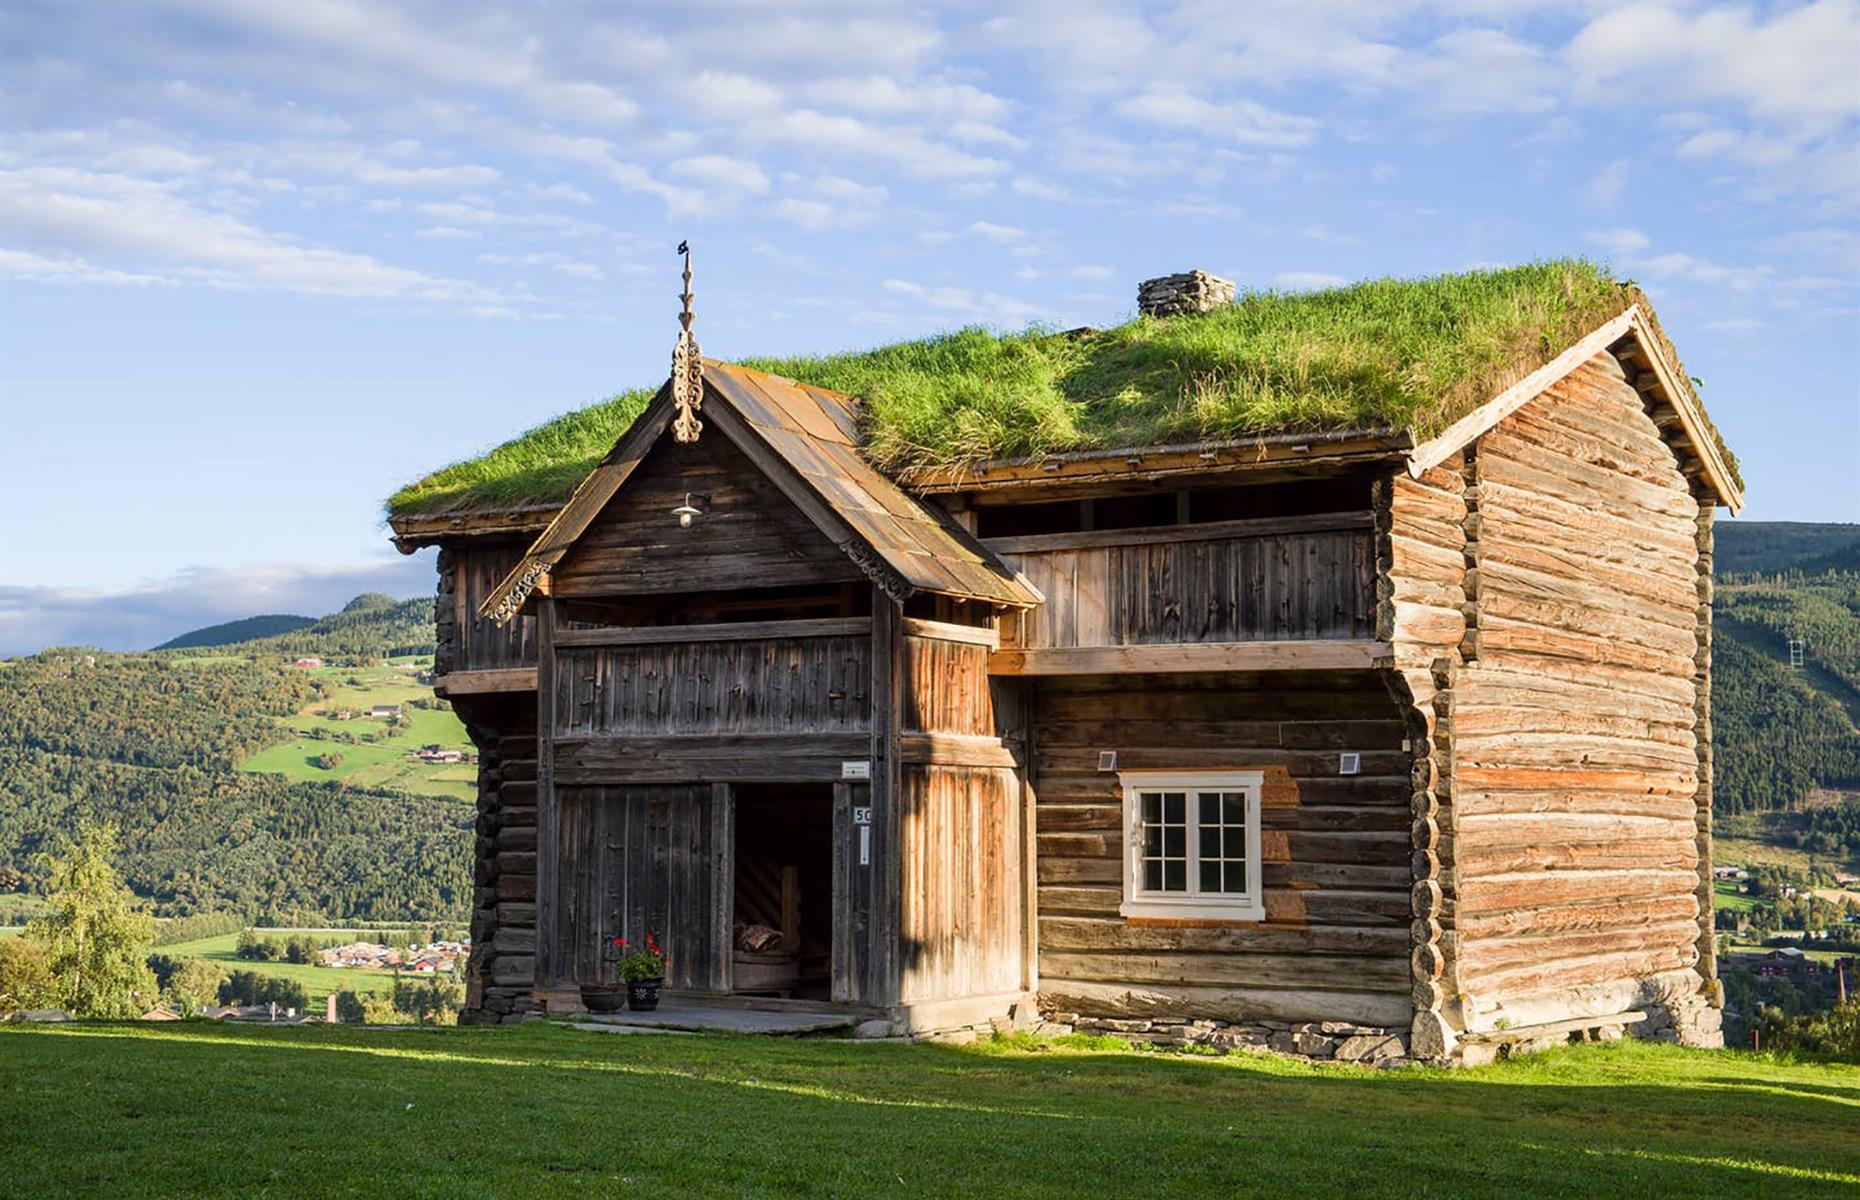 <p>The Blessom family have owned <a href="https://www.airbnb.co.uk/rooms/2414849">this charming Norwegian sheep farm</a> since the 17th century and it's one of the oldest in the Gudbrandsdalen valley. In summer, guests can spot sheep grazing in the rolling green hills and in winter, cozy up by the stone fireplace of the wood-paneled house. It's a place to slow down, relax and soak in the fairy-tale surroundings.</p>